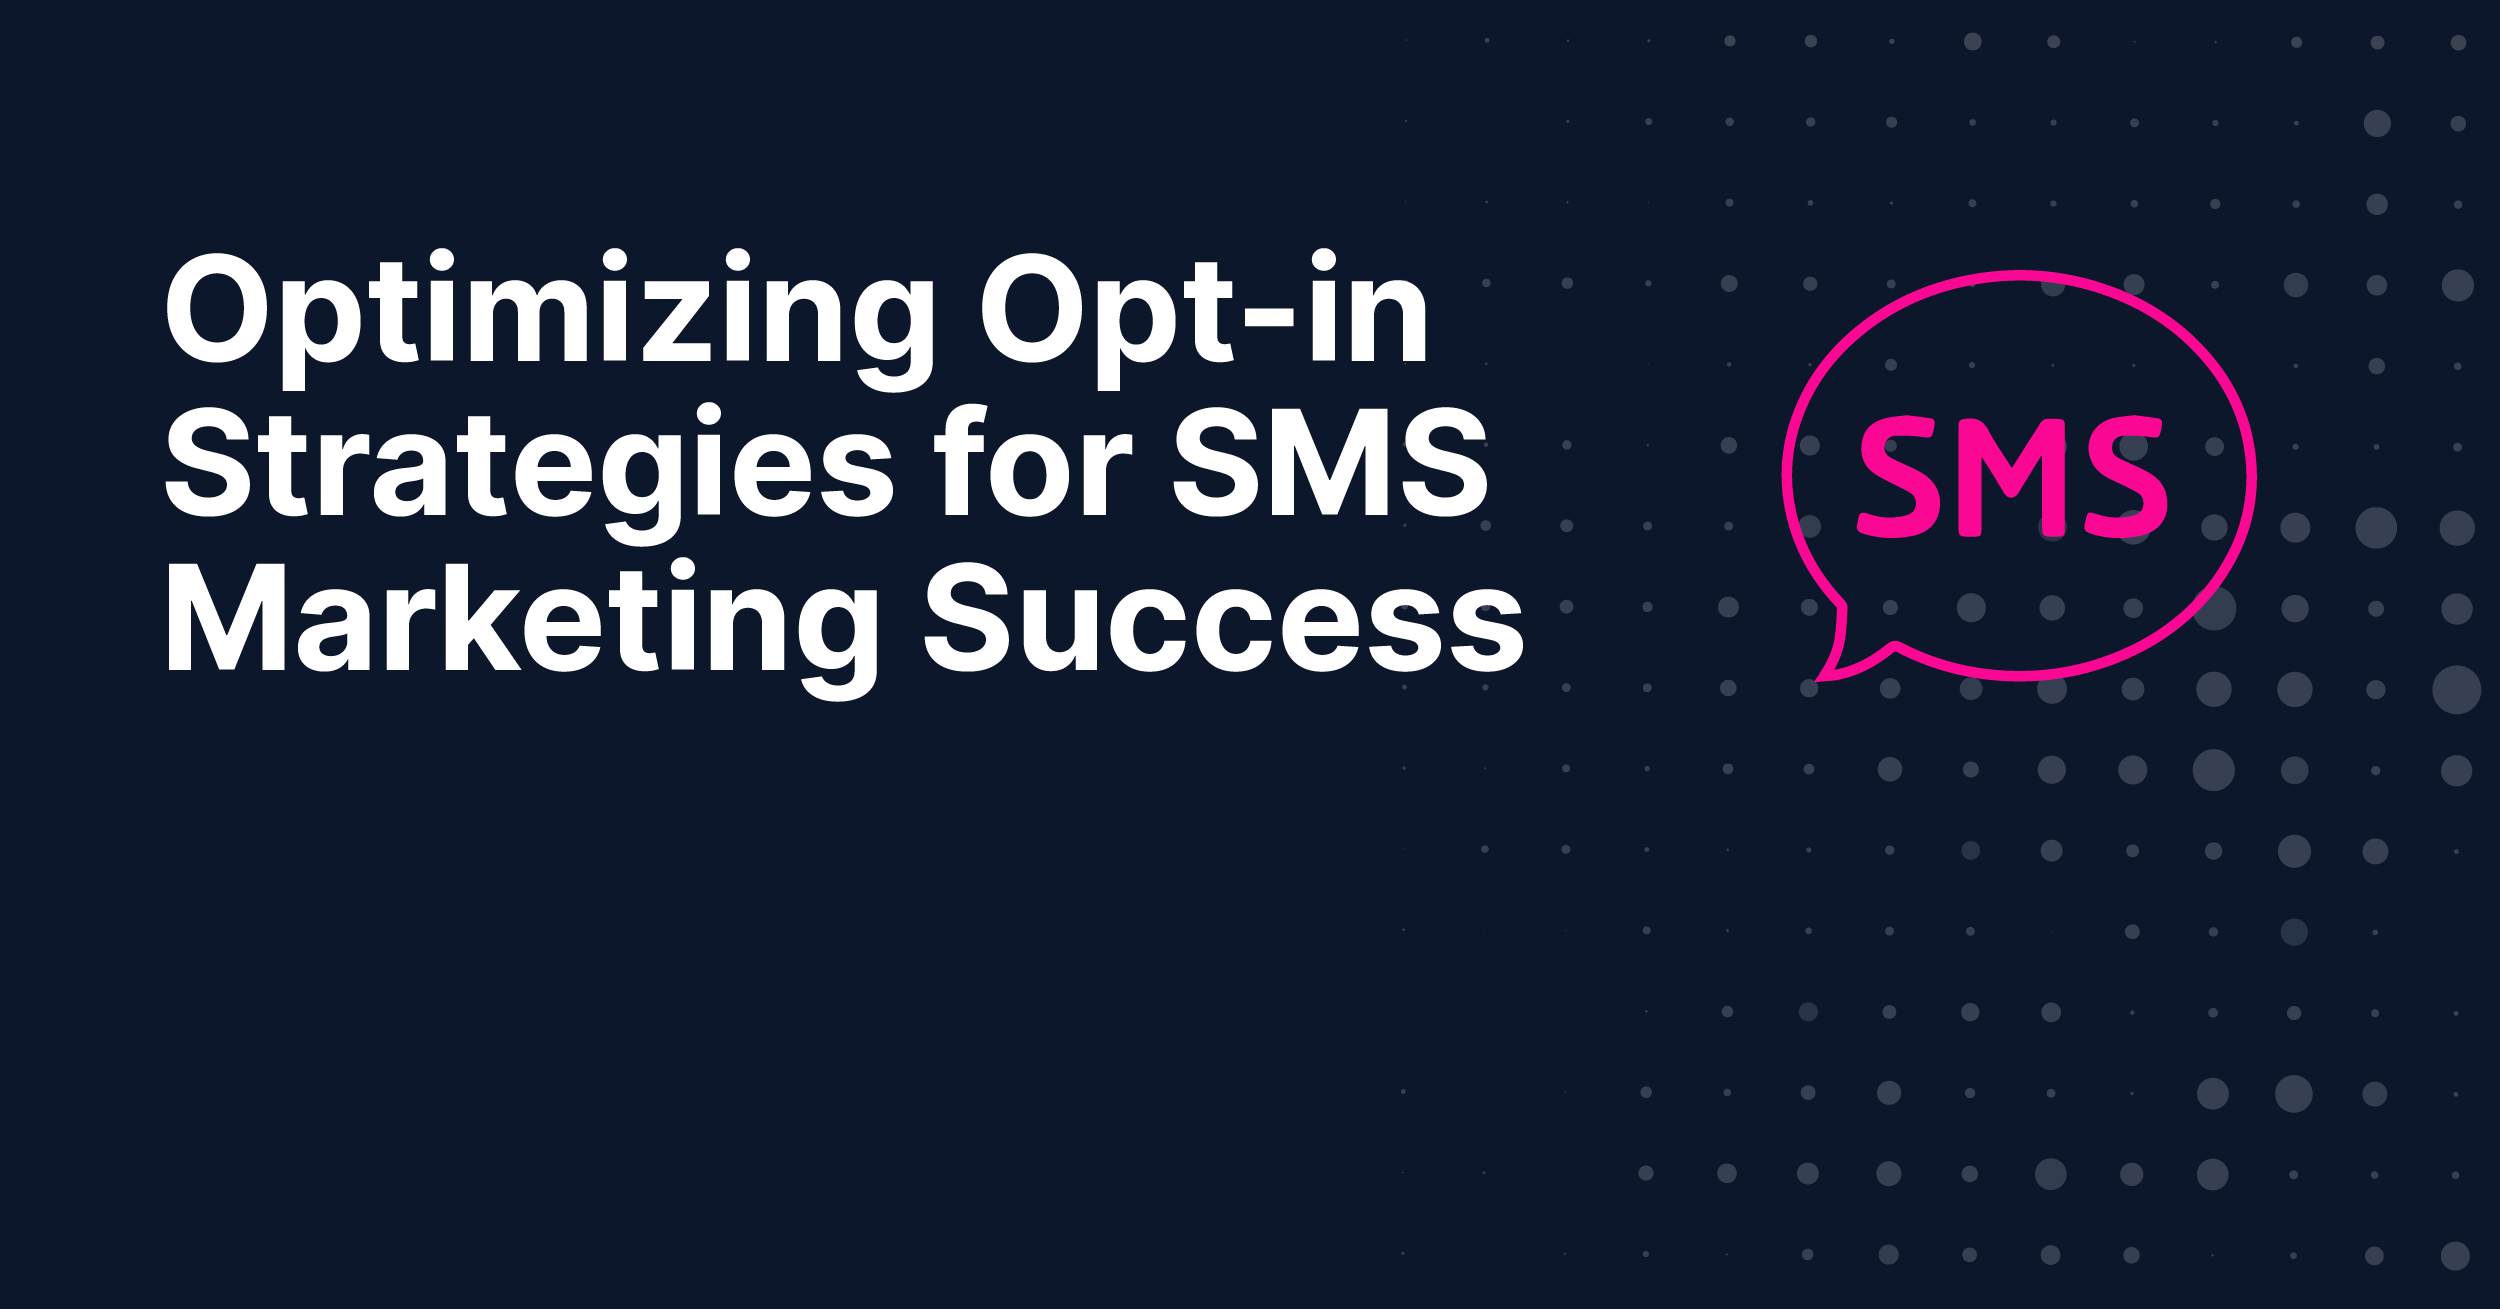 Optimizing Opt-in Strategies for SMS Marketing Success